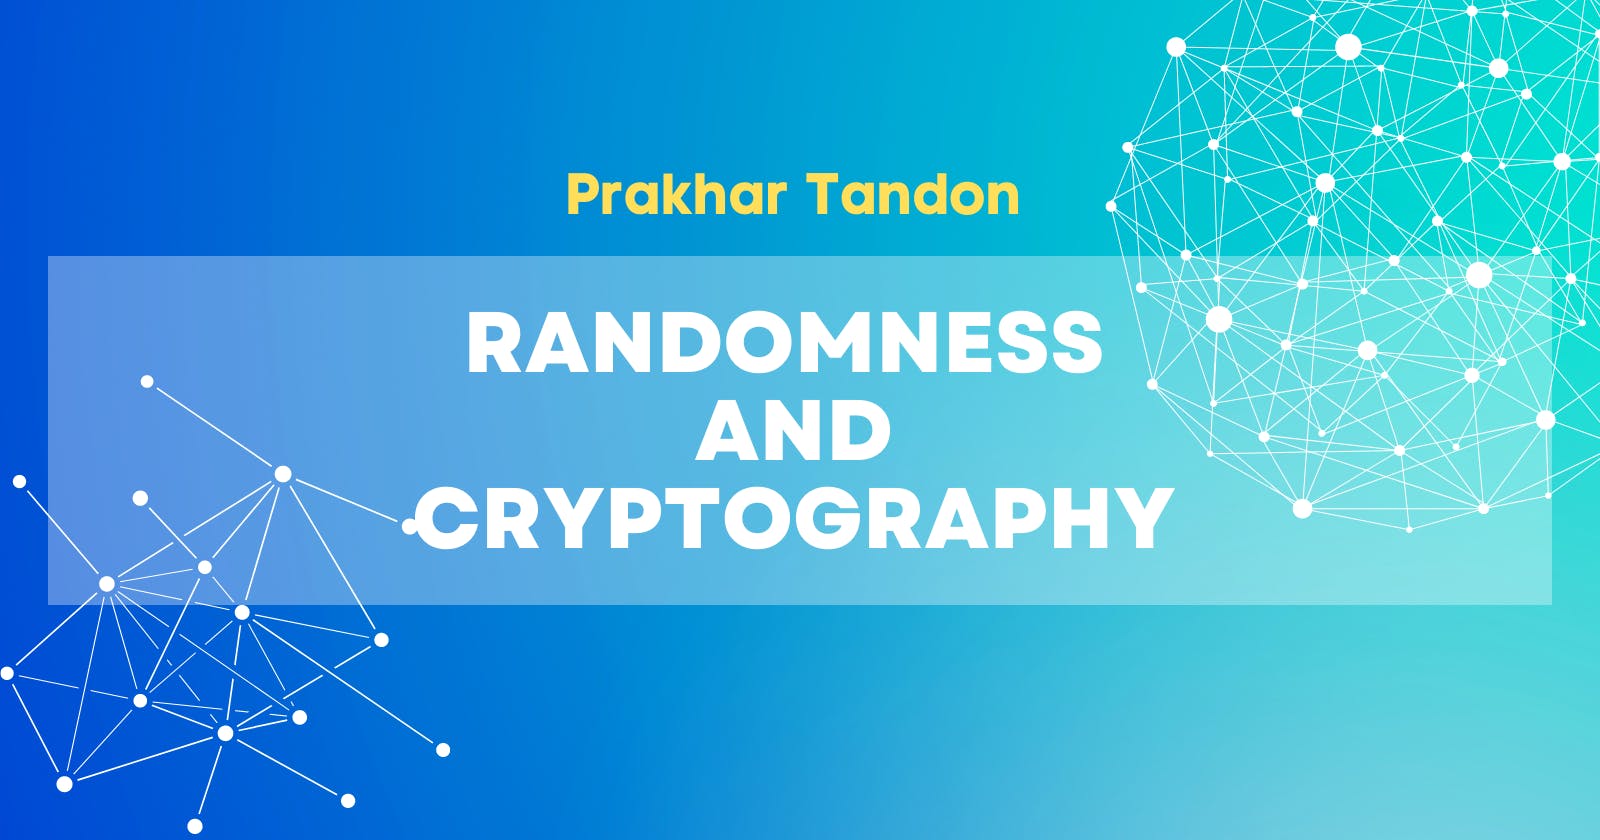 Cryptography and Randomness